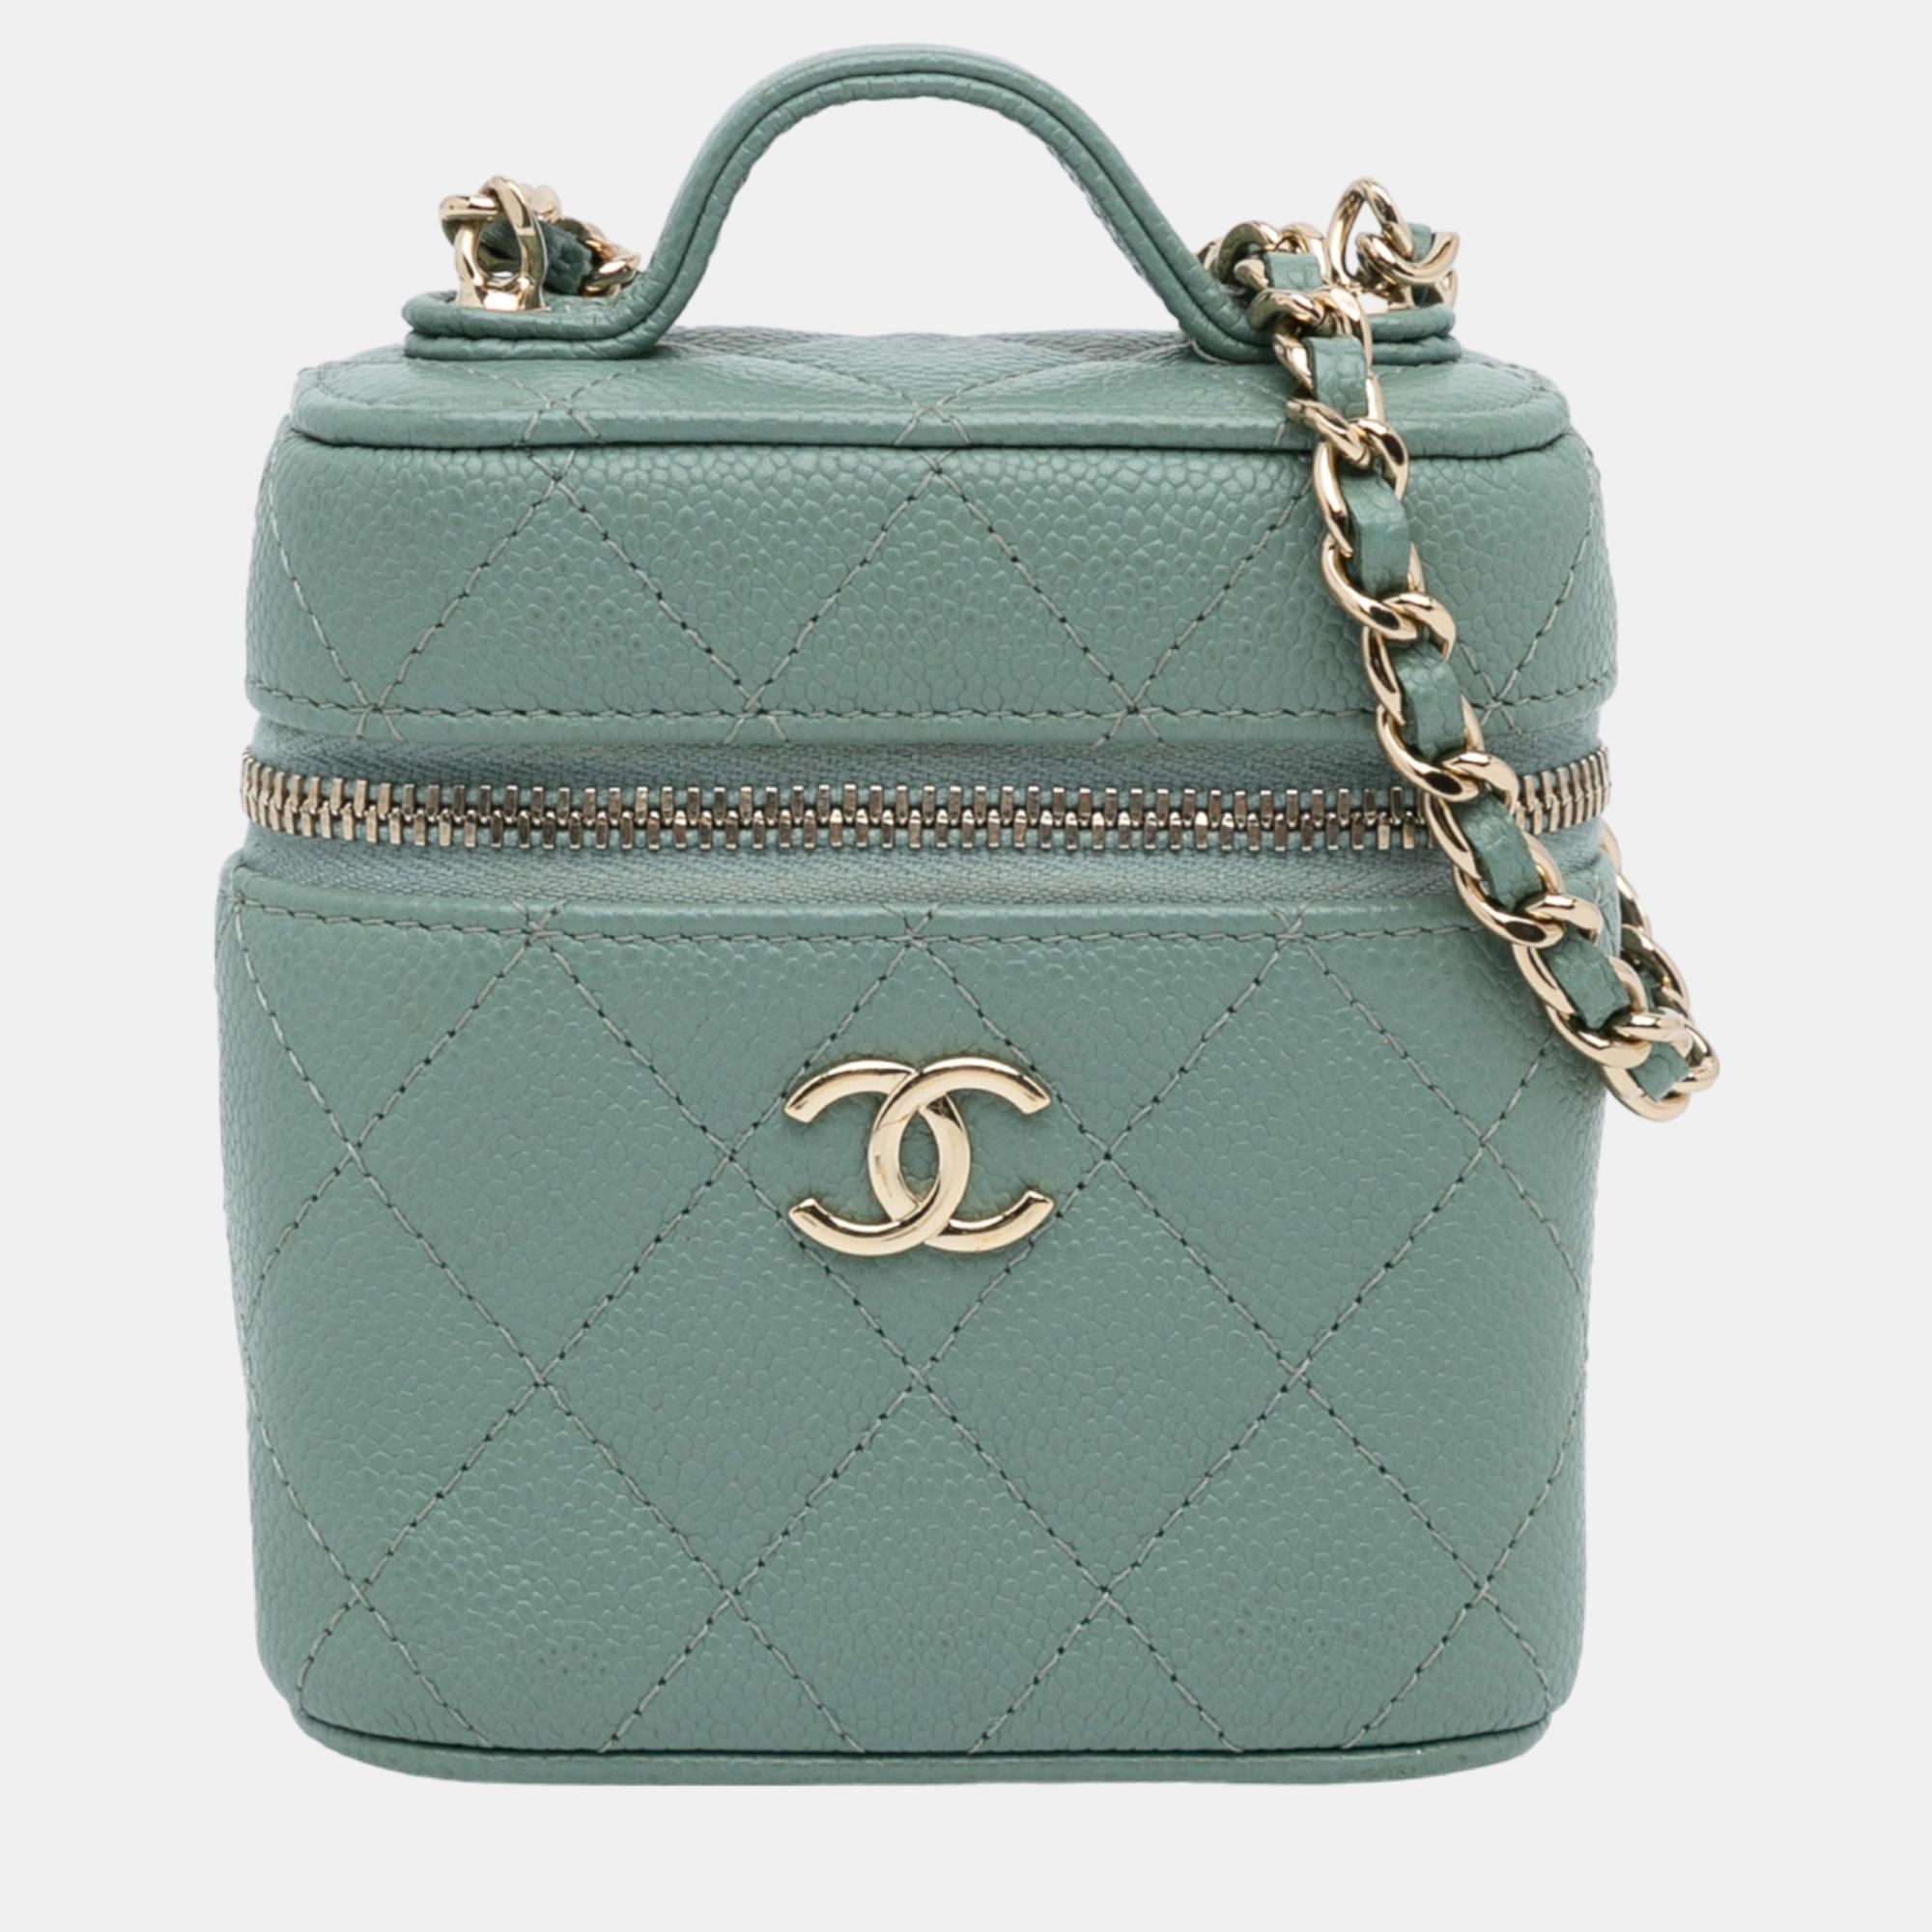 Pre-owned Chanel Green Cc Caviar Vanity Bag